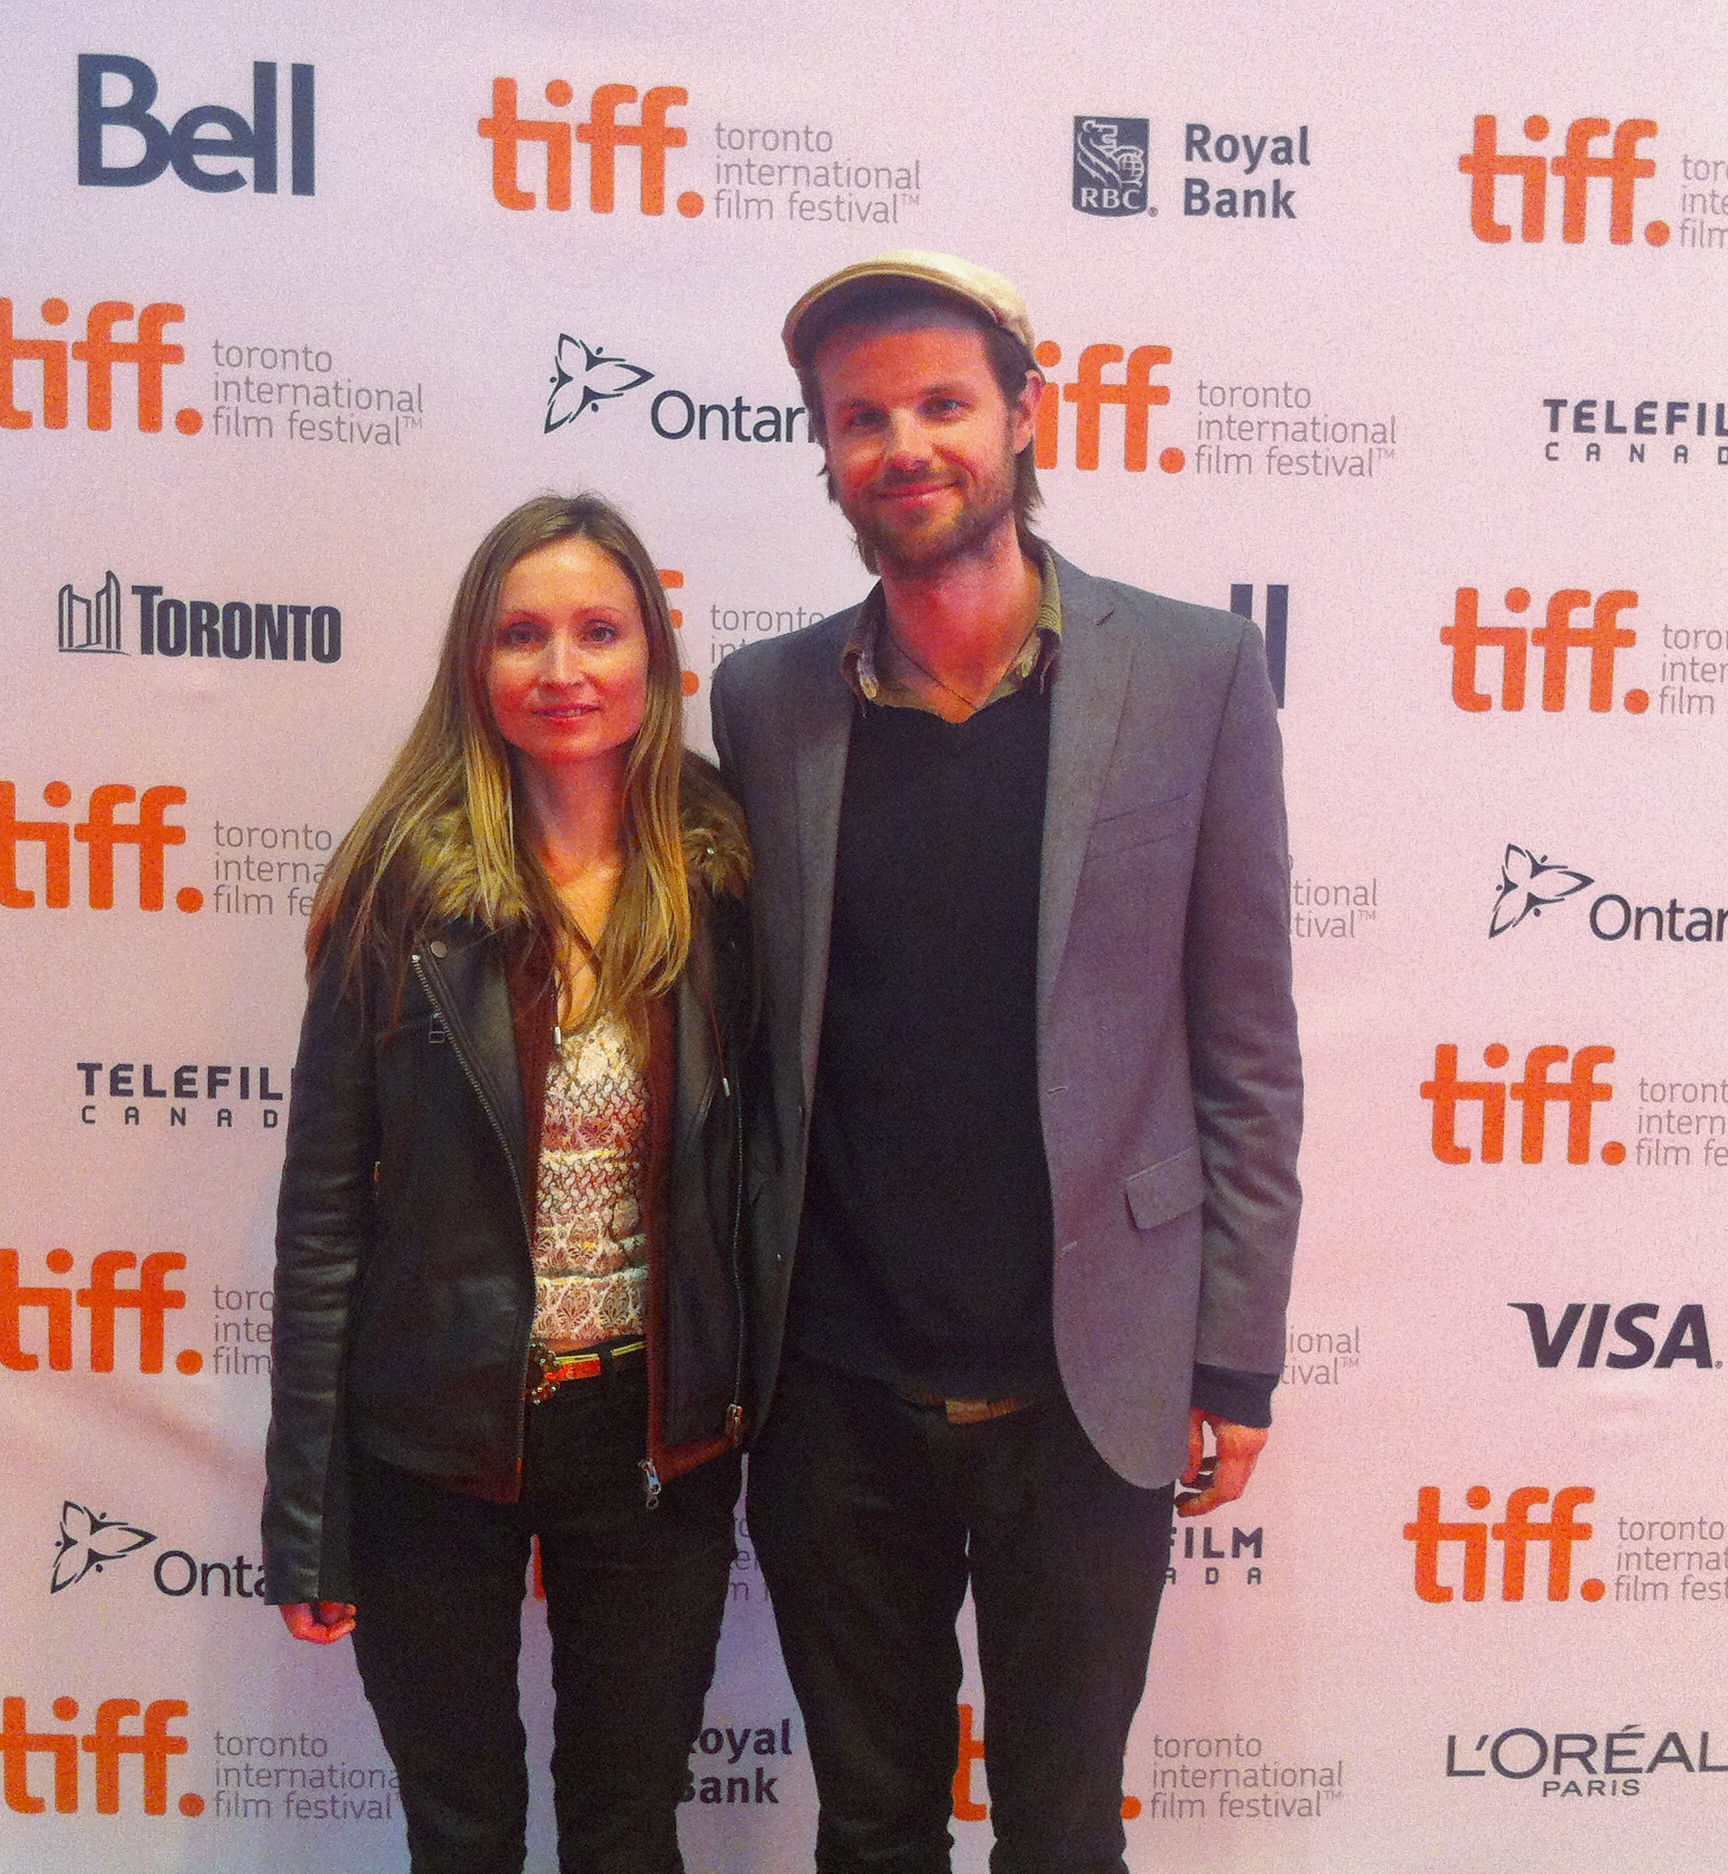 James Napier Robertson at the TIFF premiere of The Dark Horse with film composer Dana Lund